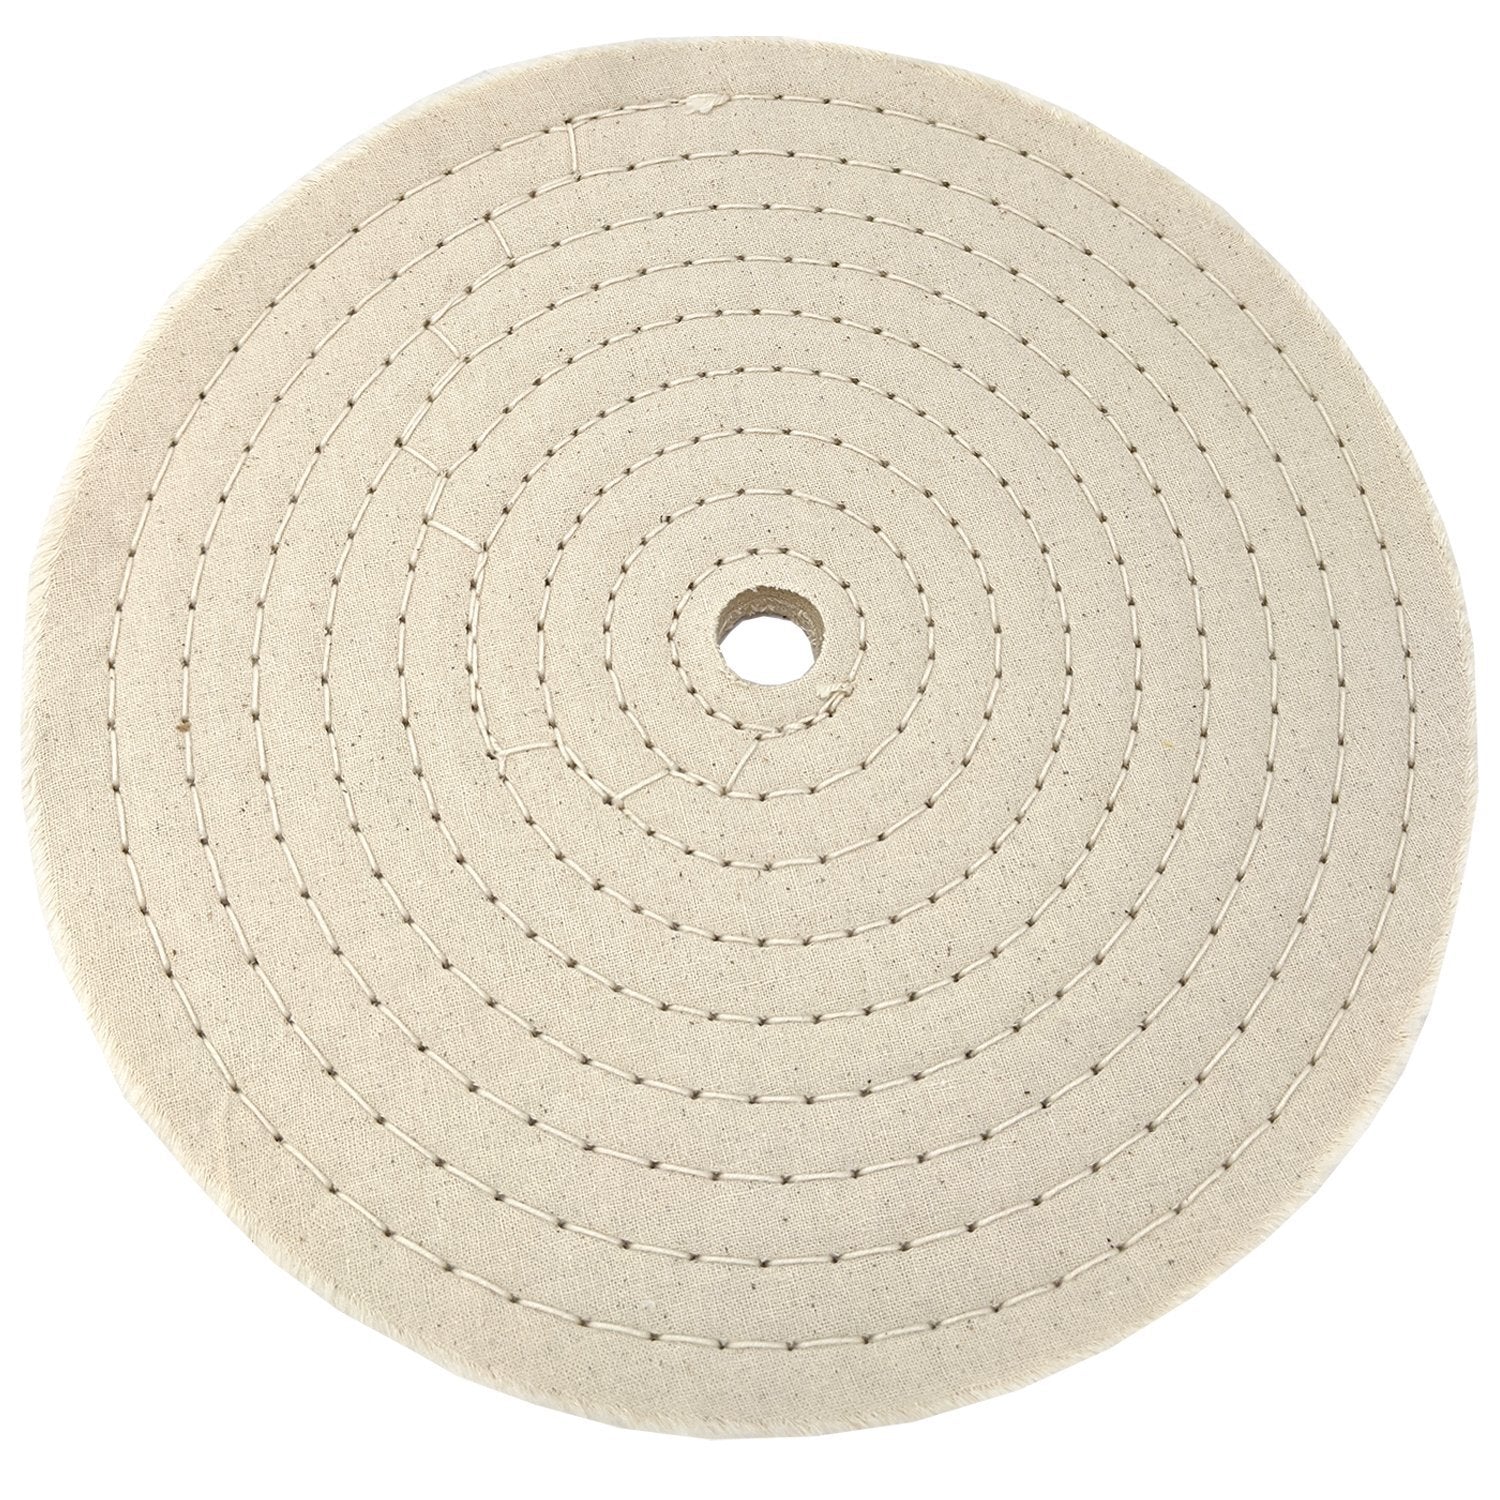 Polishing Wheel 4 inch Wear Resistant Reusable Buffing Wheel Professional Polishing Accessories Kit with Polish Compound for Wood Plastic Metal